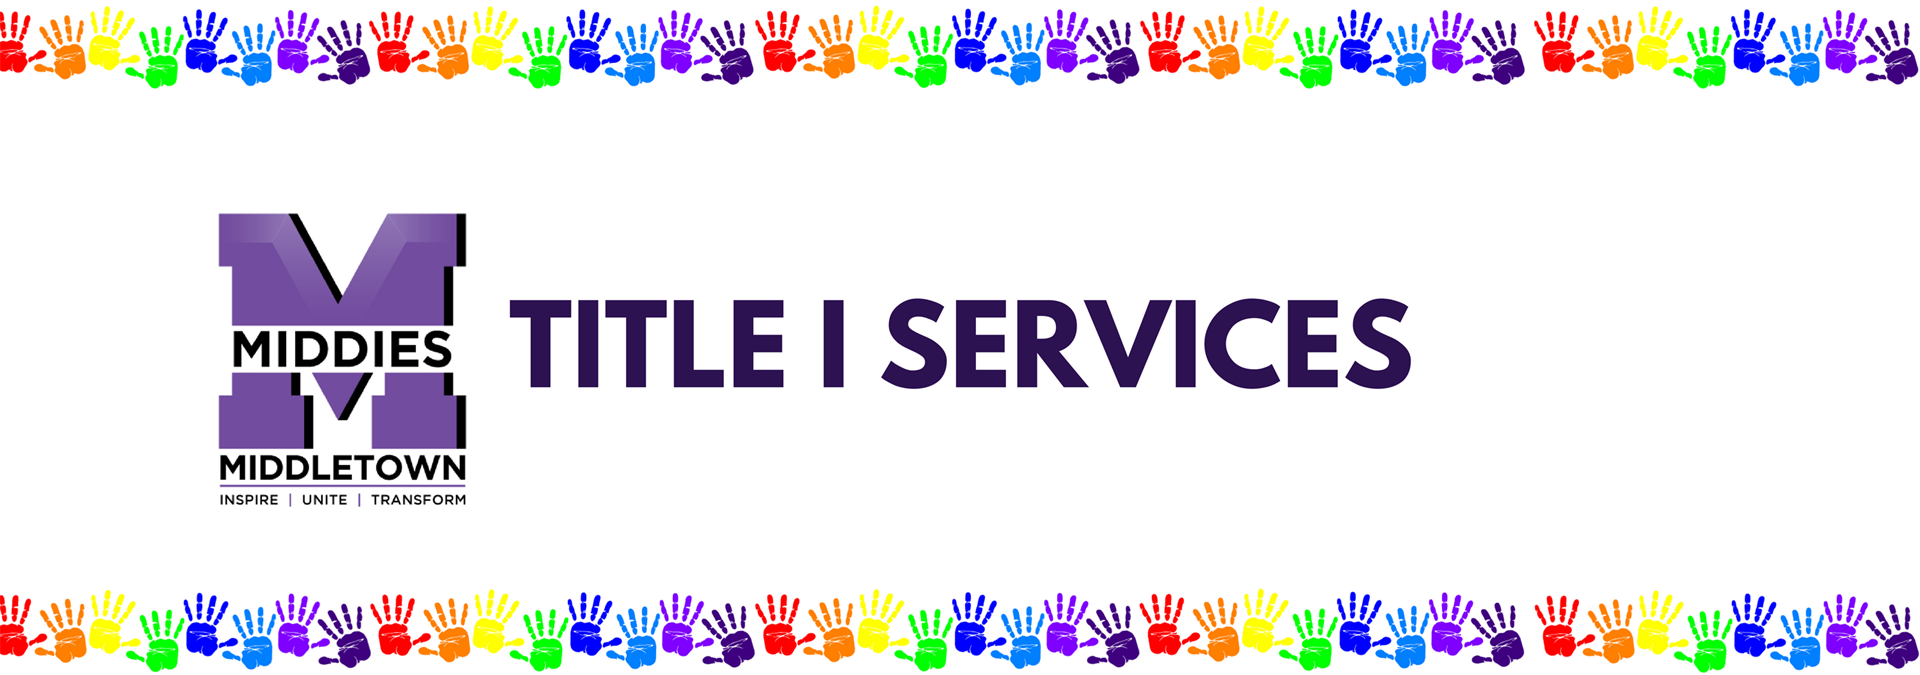 Title I Services Graphic